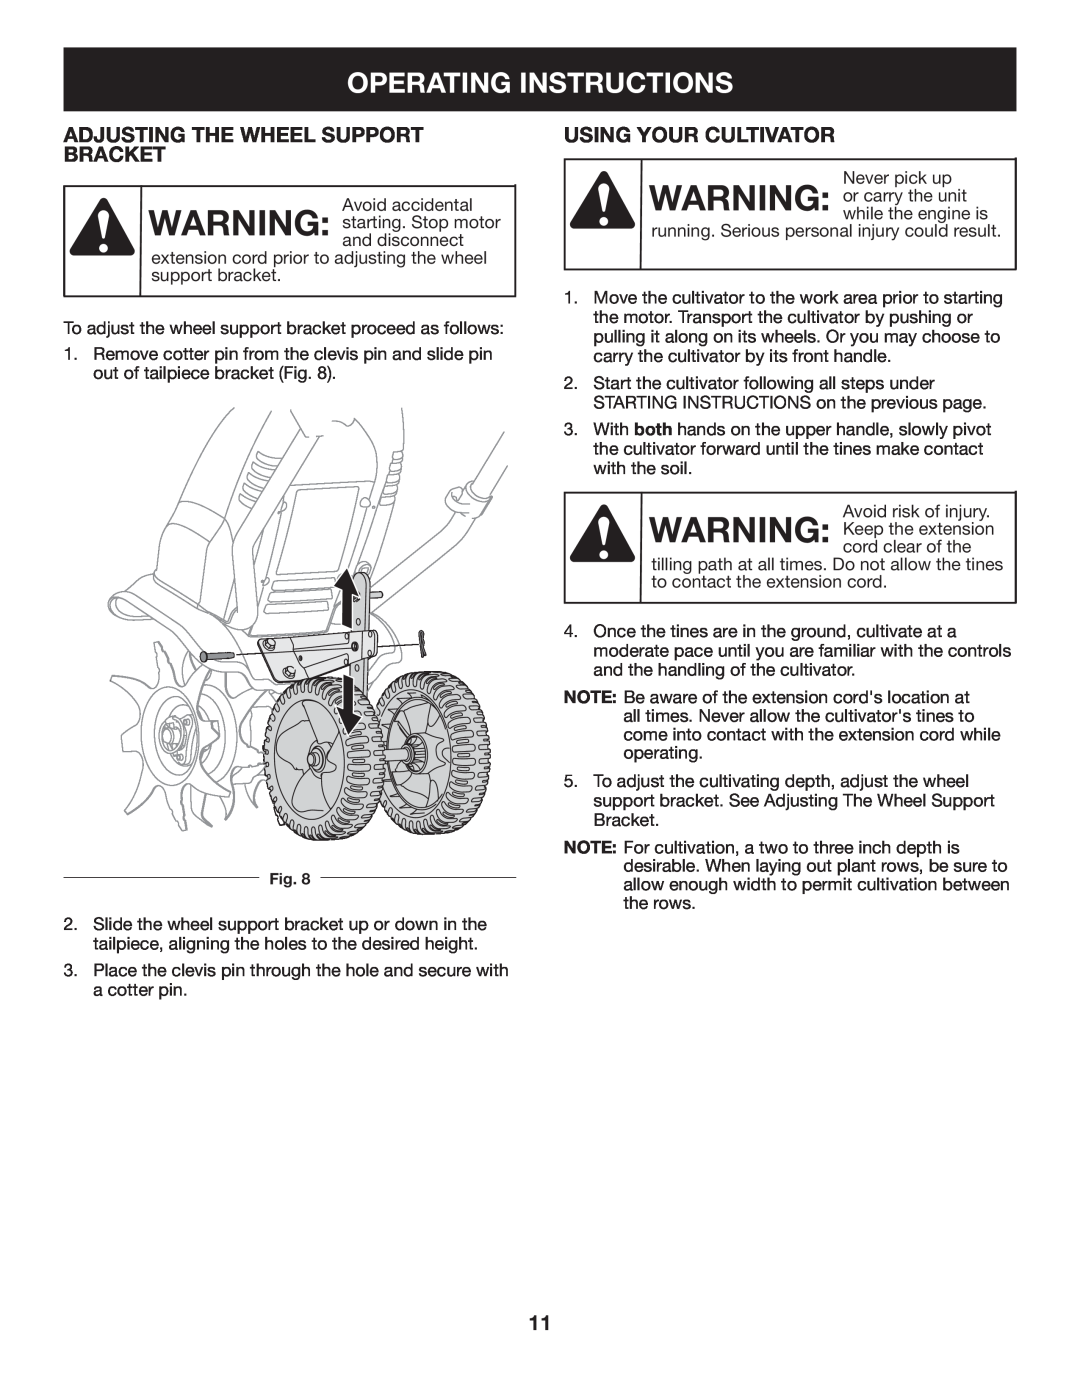 Craftsman 316.2926 manual Operating Instructions, Adjusting The Wheel Support Bracket, Using Your Cultivator 